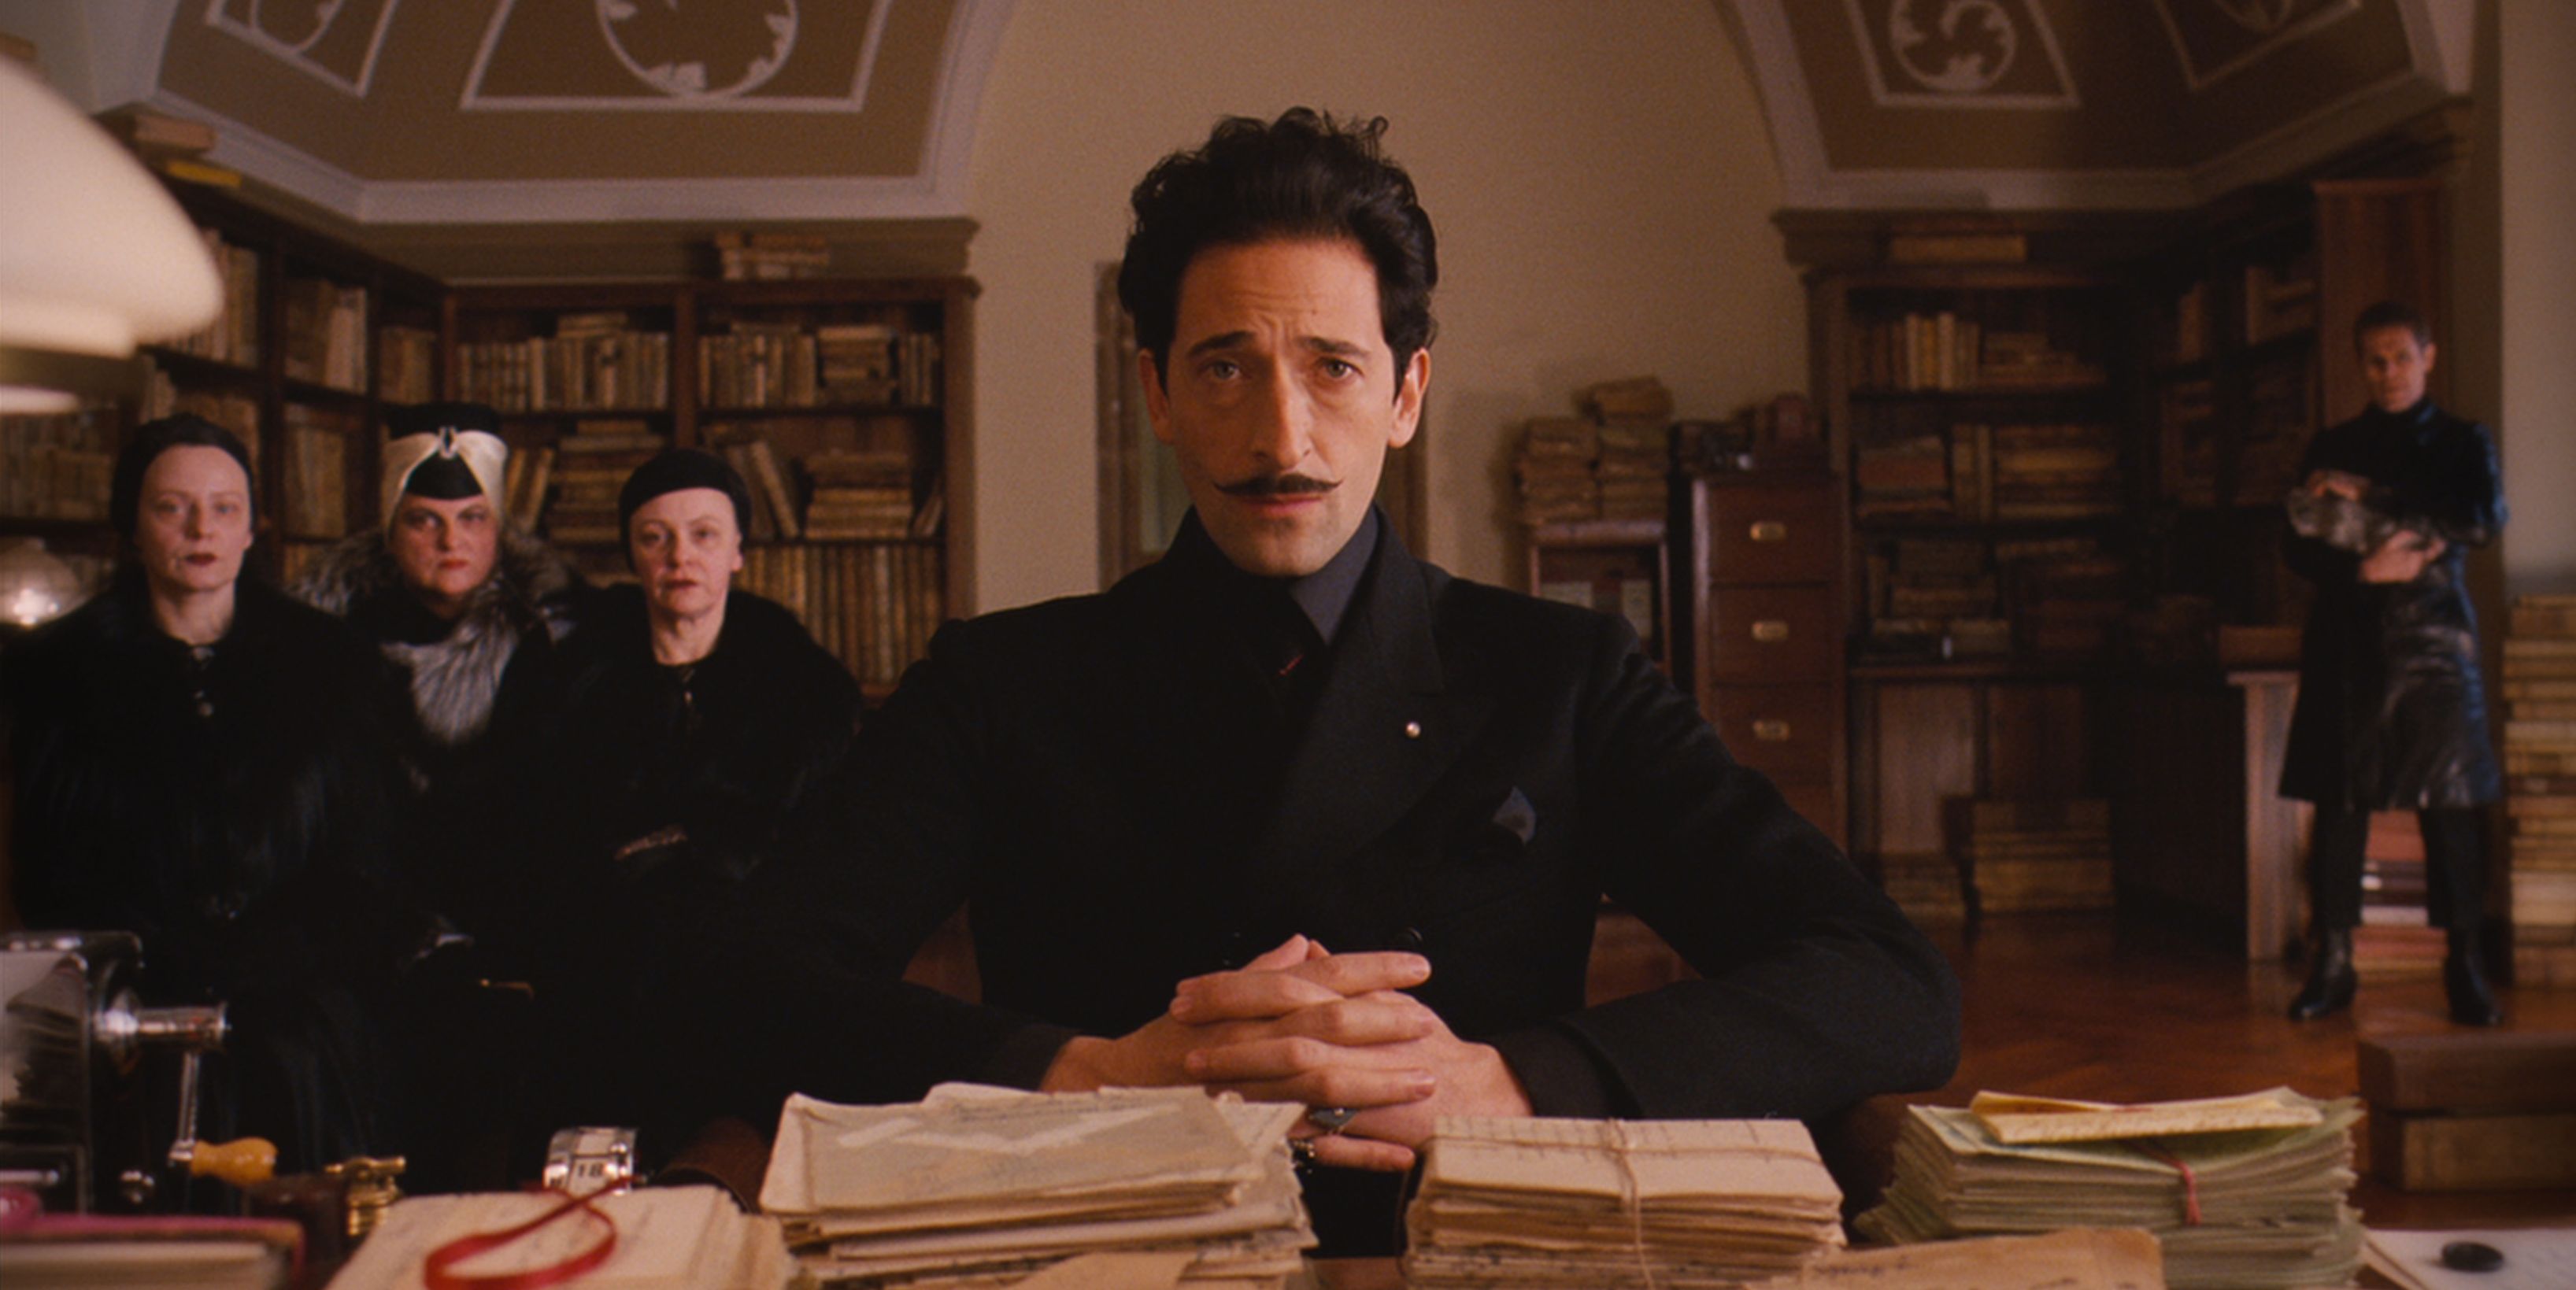 Adrien Brody as Dmitri in The Grand Budapest Hotel